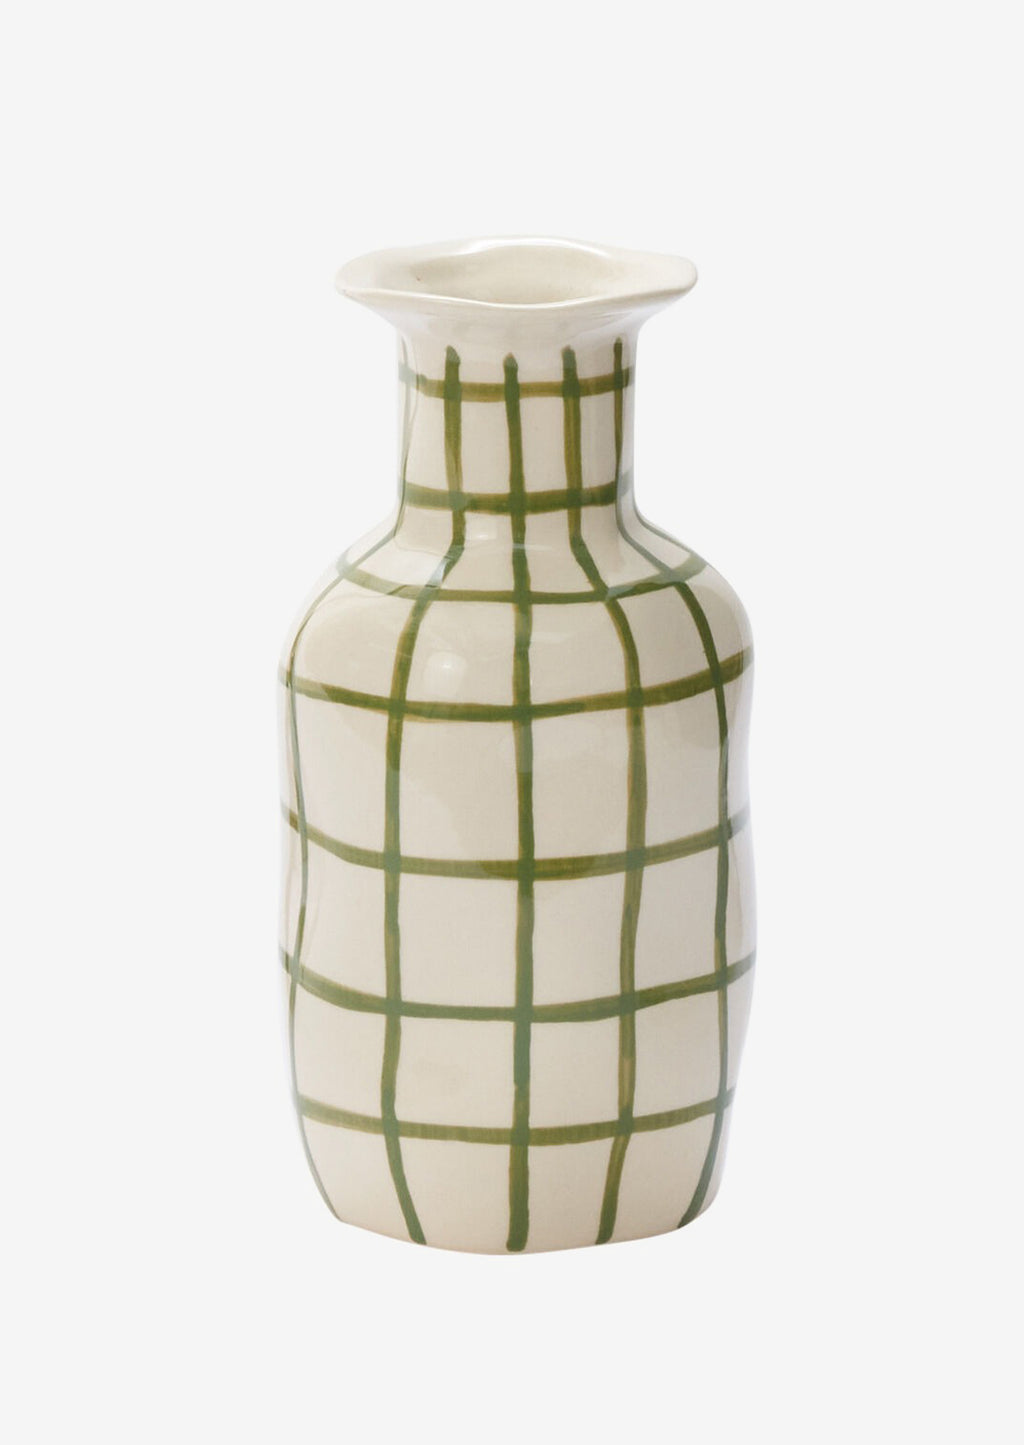 1: A ceramic vase in white with green grid pattern.